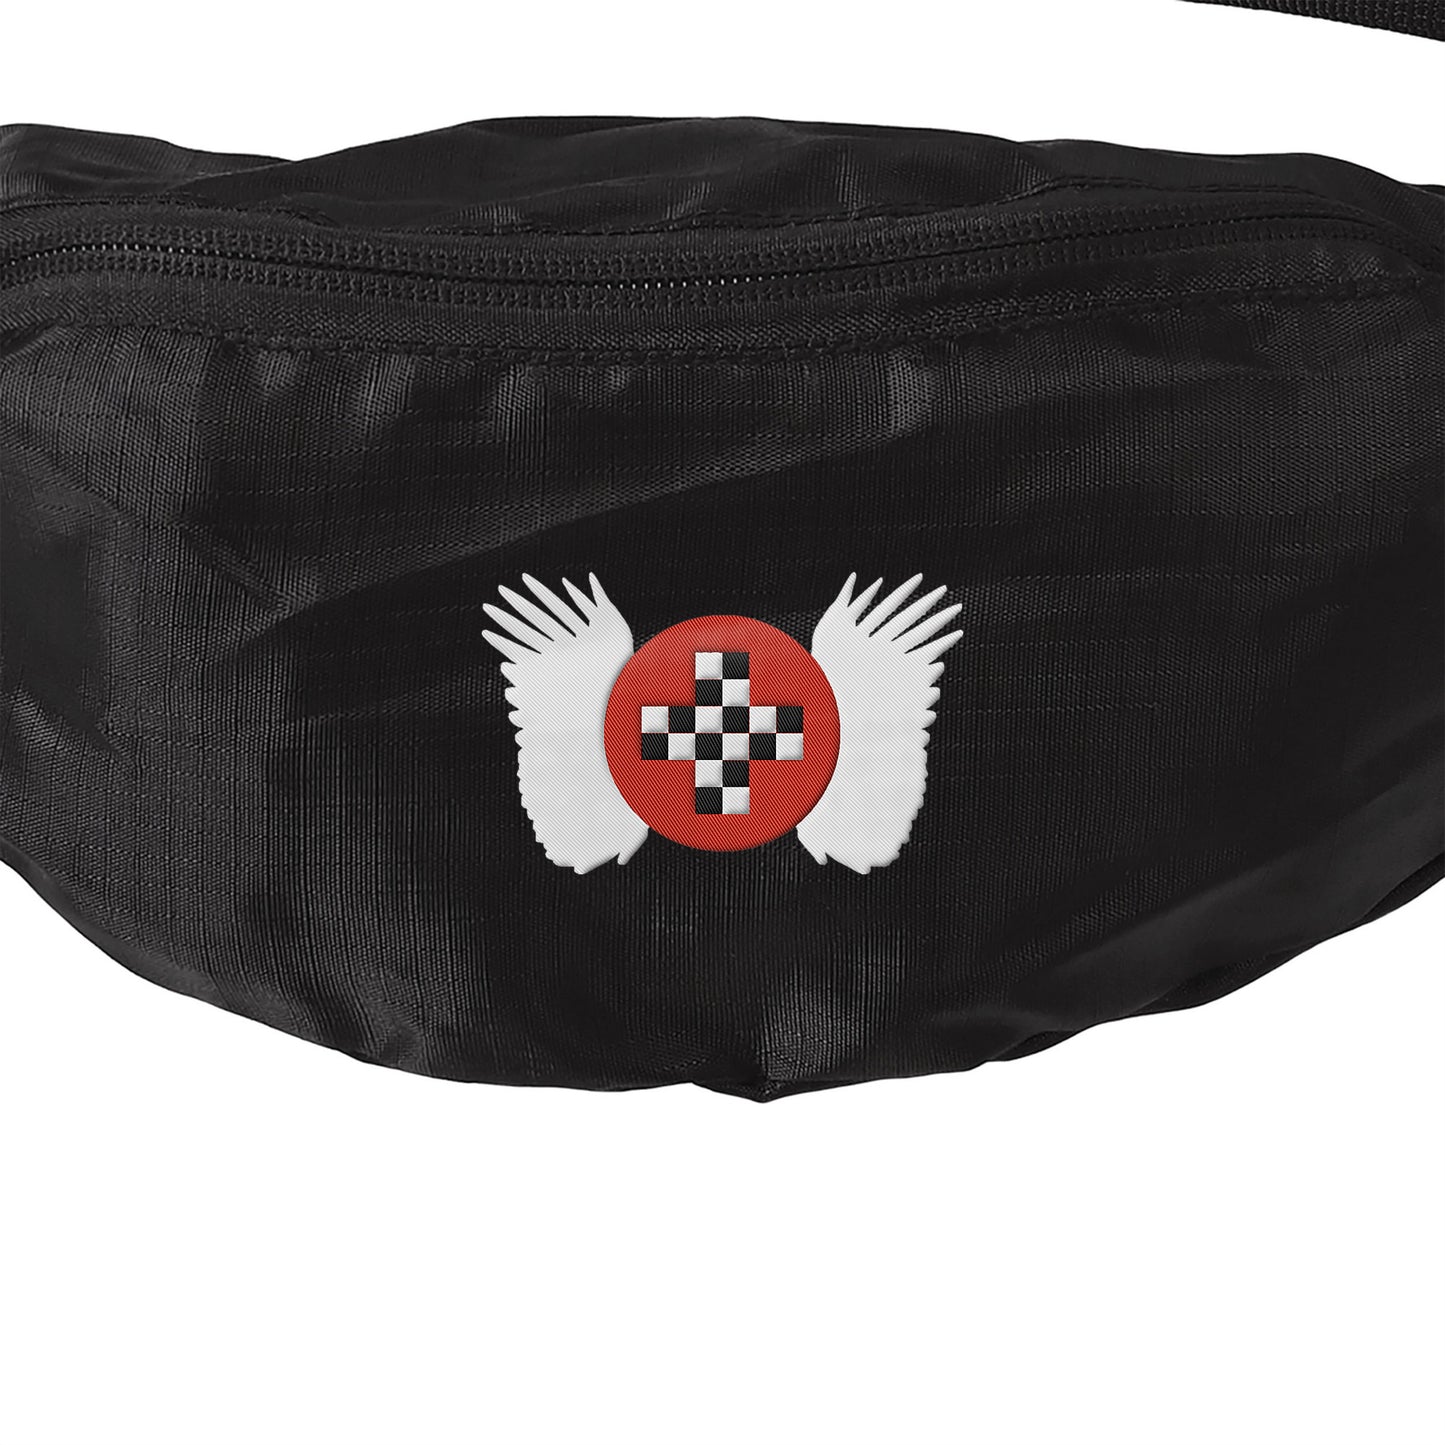 Cross Checkered Wing Embroidered Body Bag